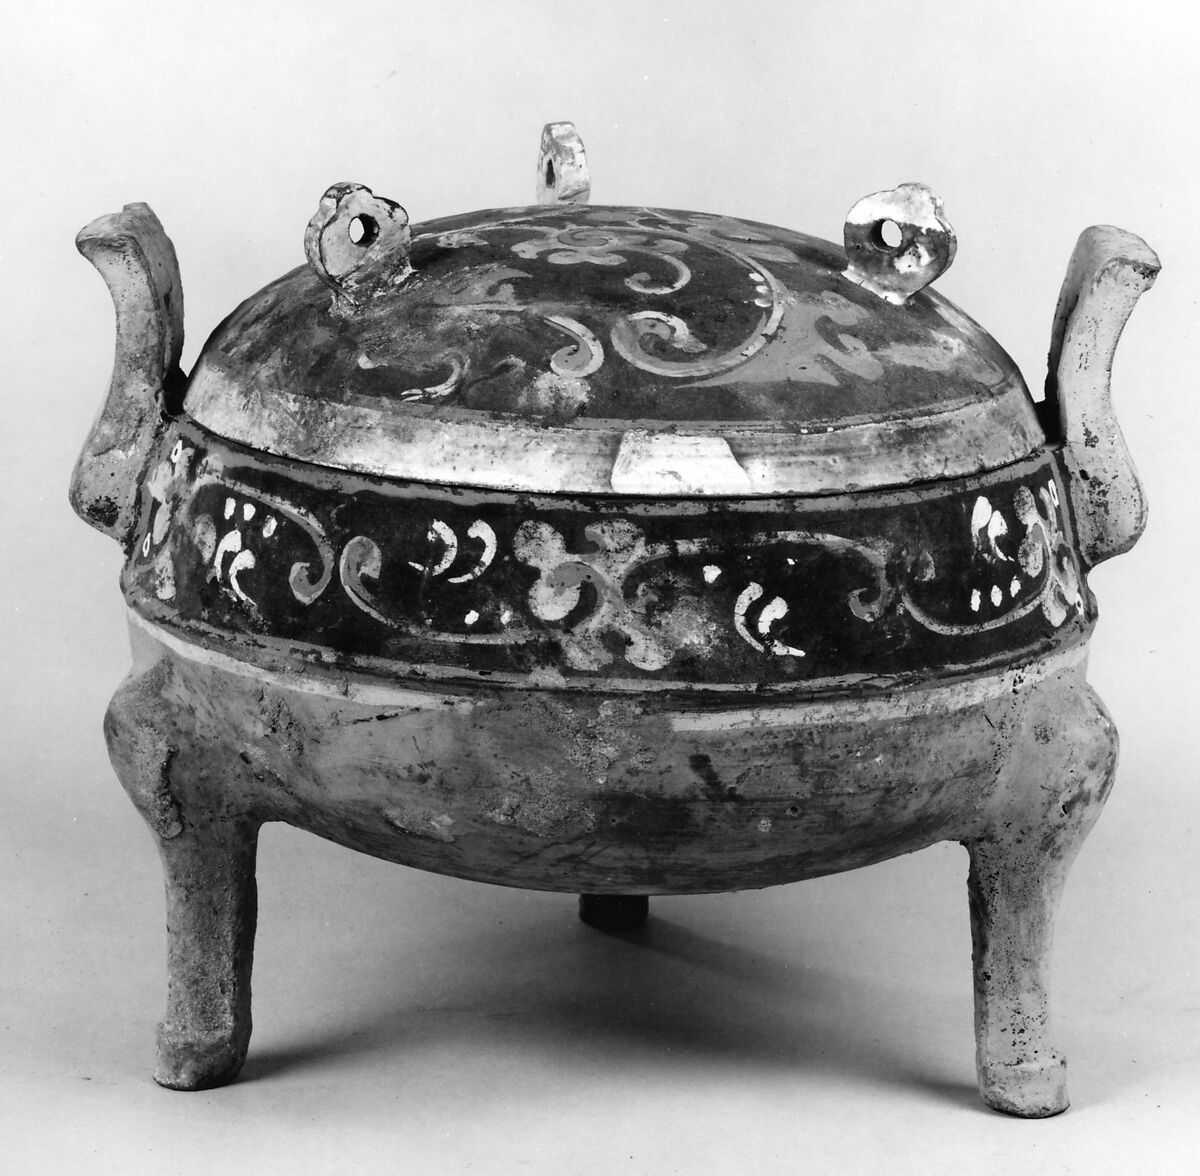 Tripod Cauldron (Ding), Earthenware with pigment, China 